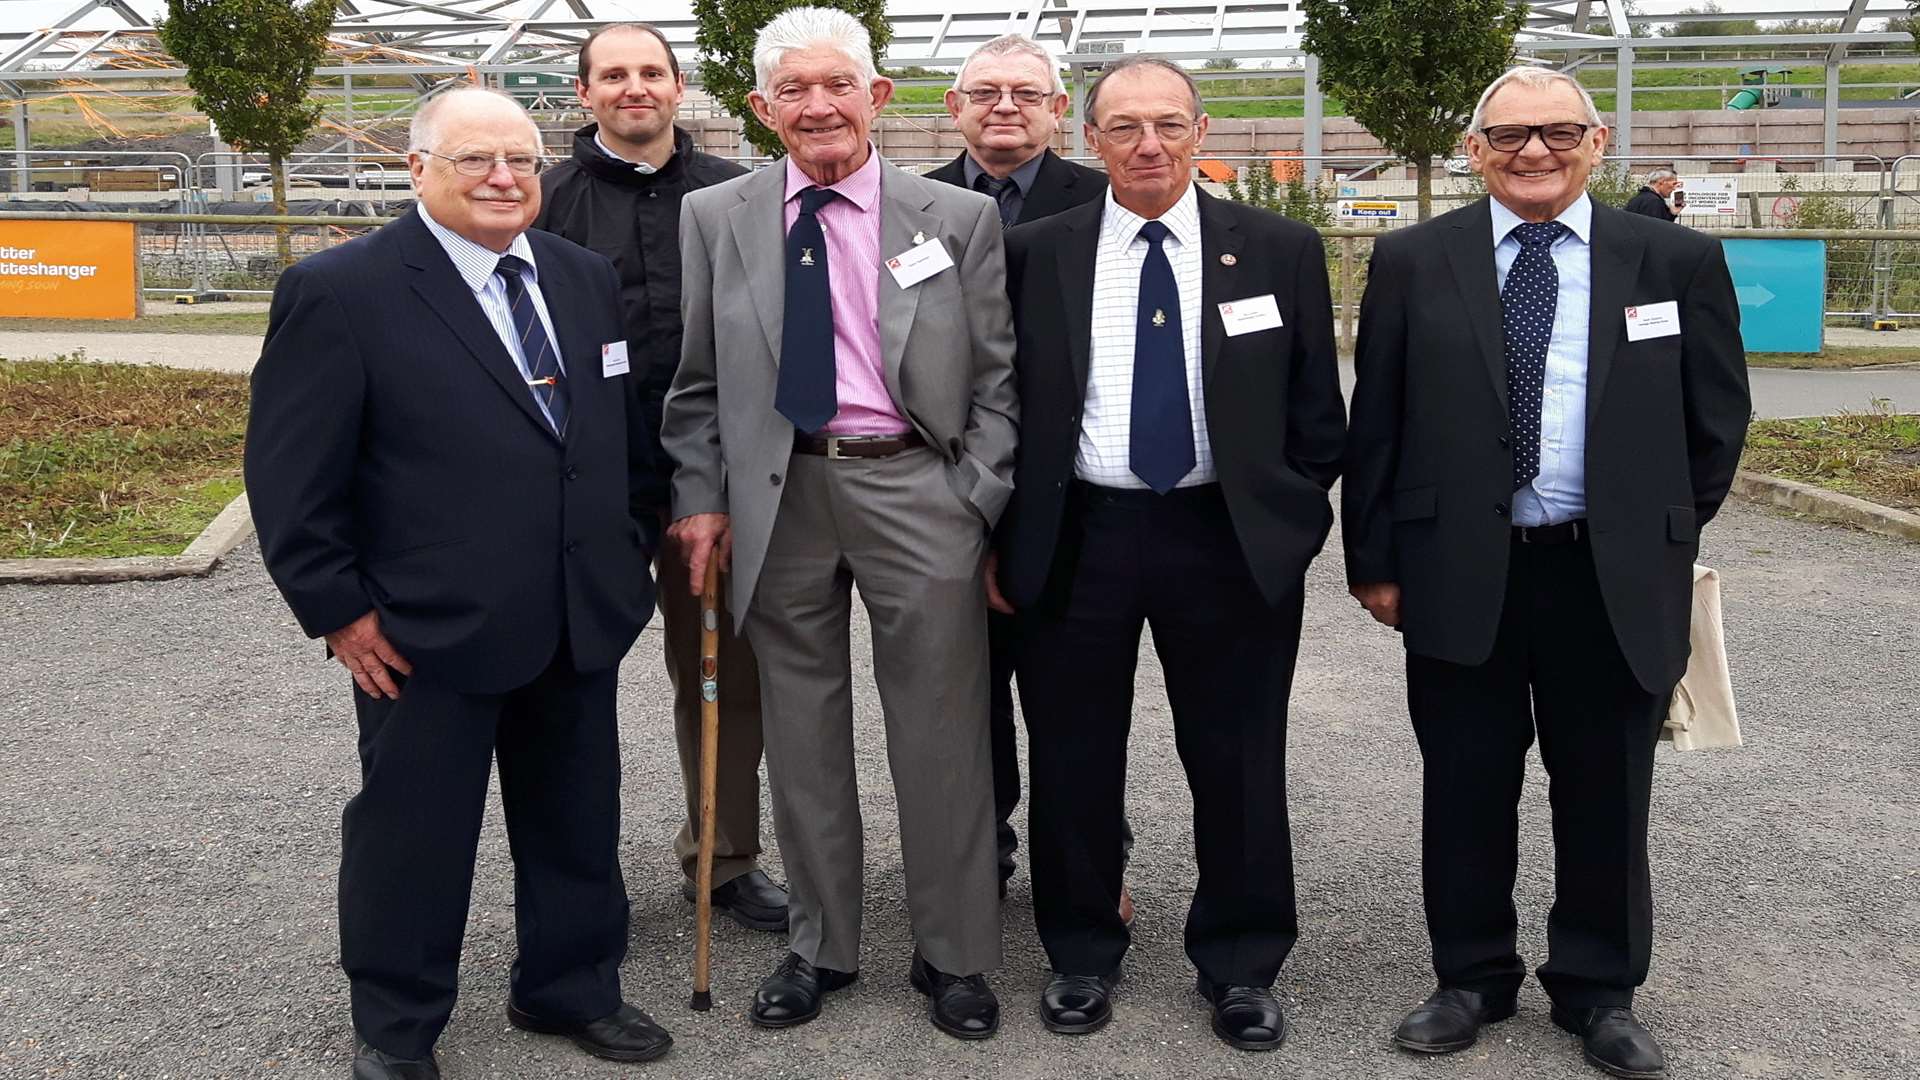 Members of the mining community came to see the topping out of the visitor centre site which will house a mining museum